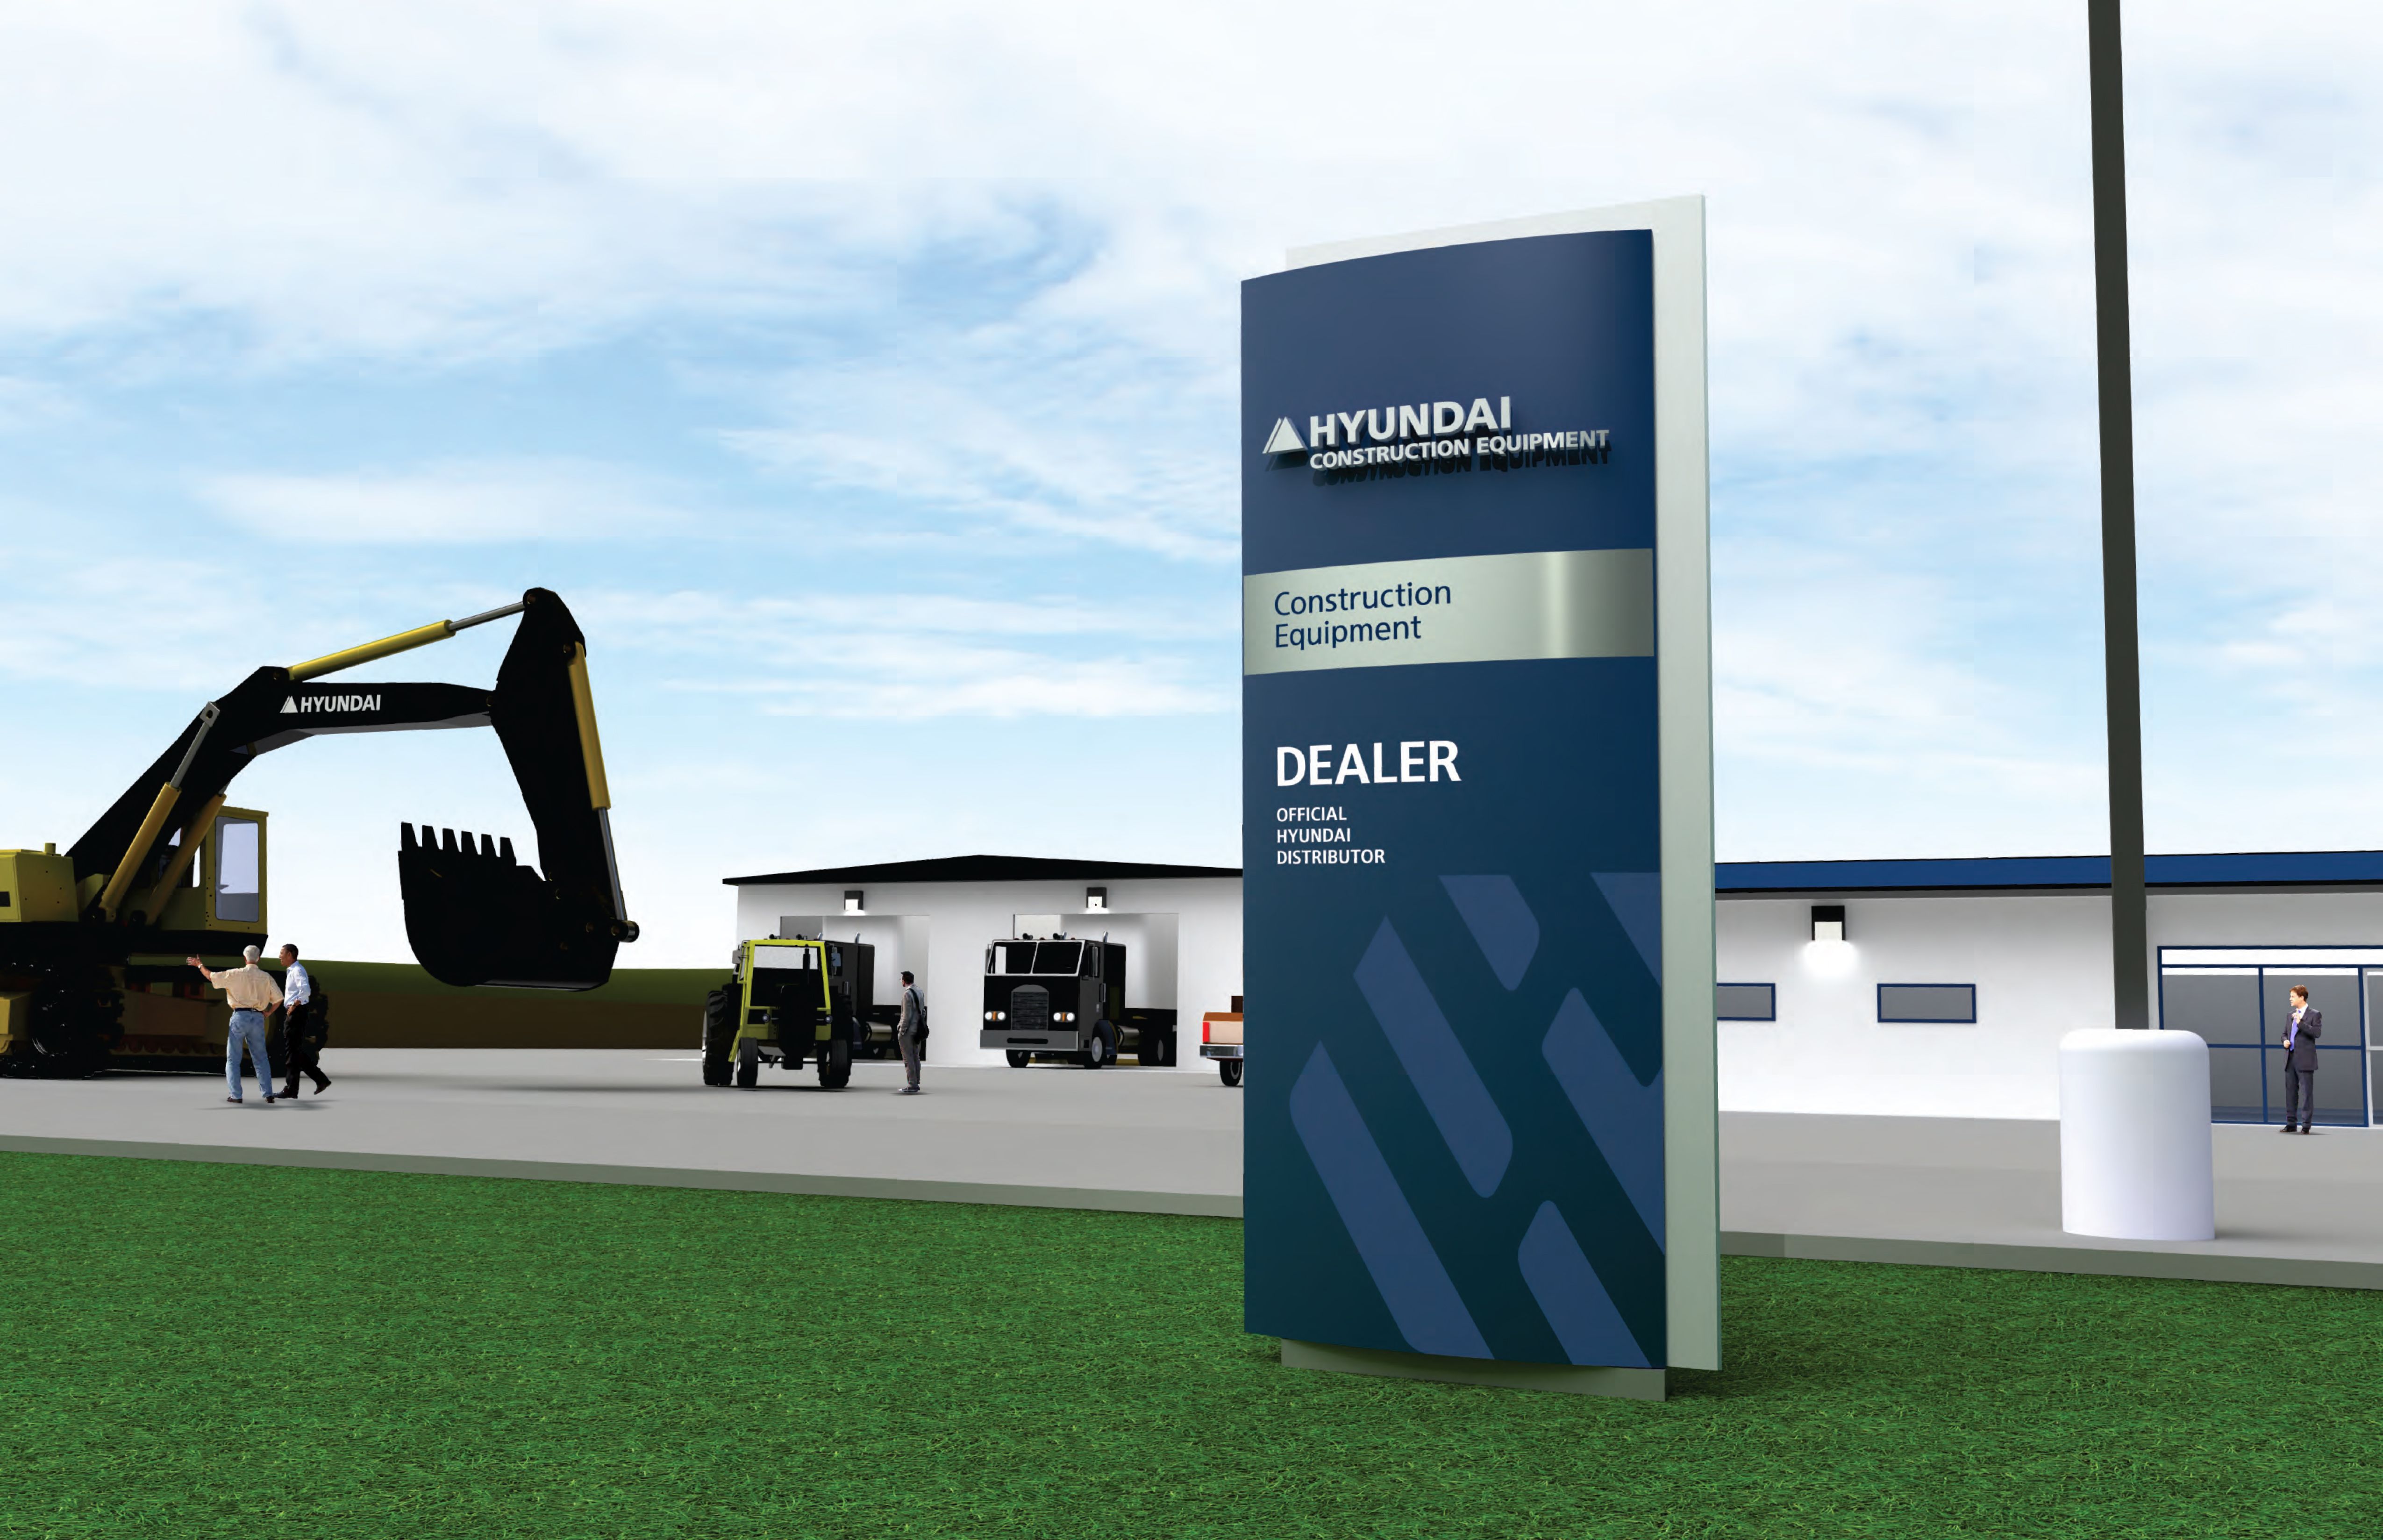 Hyundai Construction Equipment Americas Rolls Out New Dealer Signage with Updated Logo